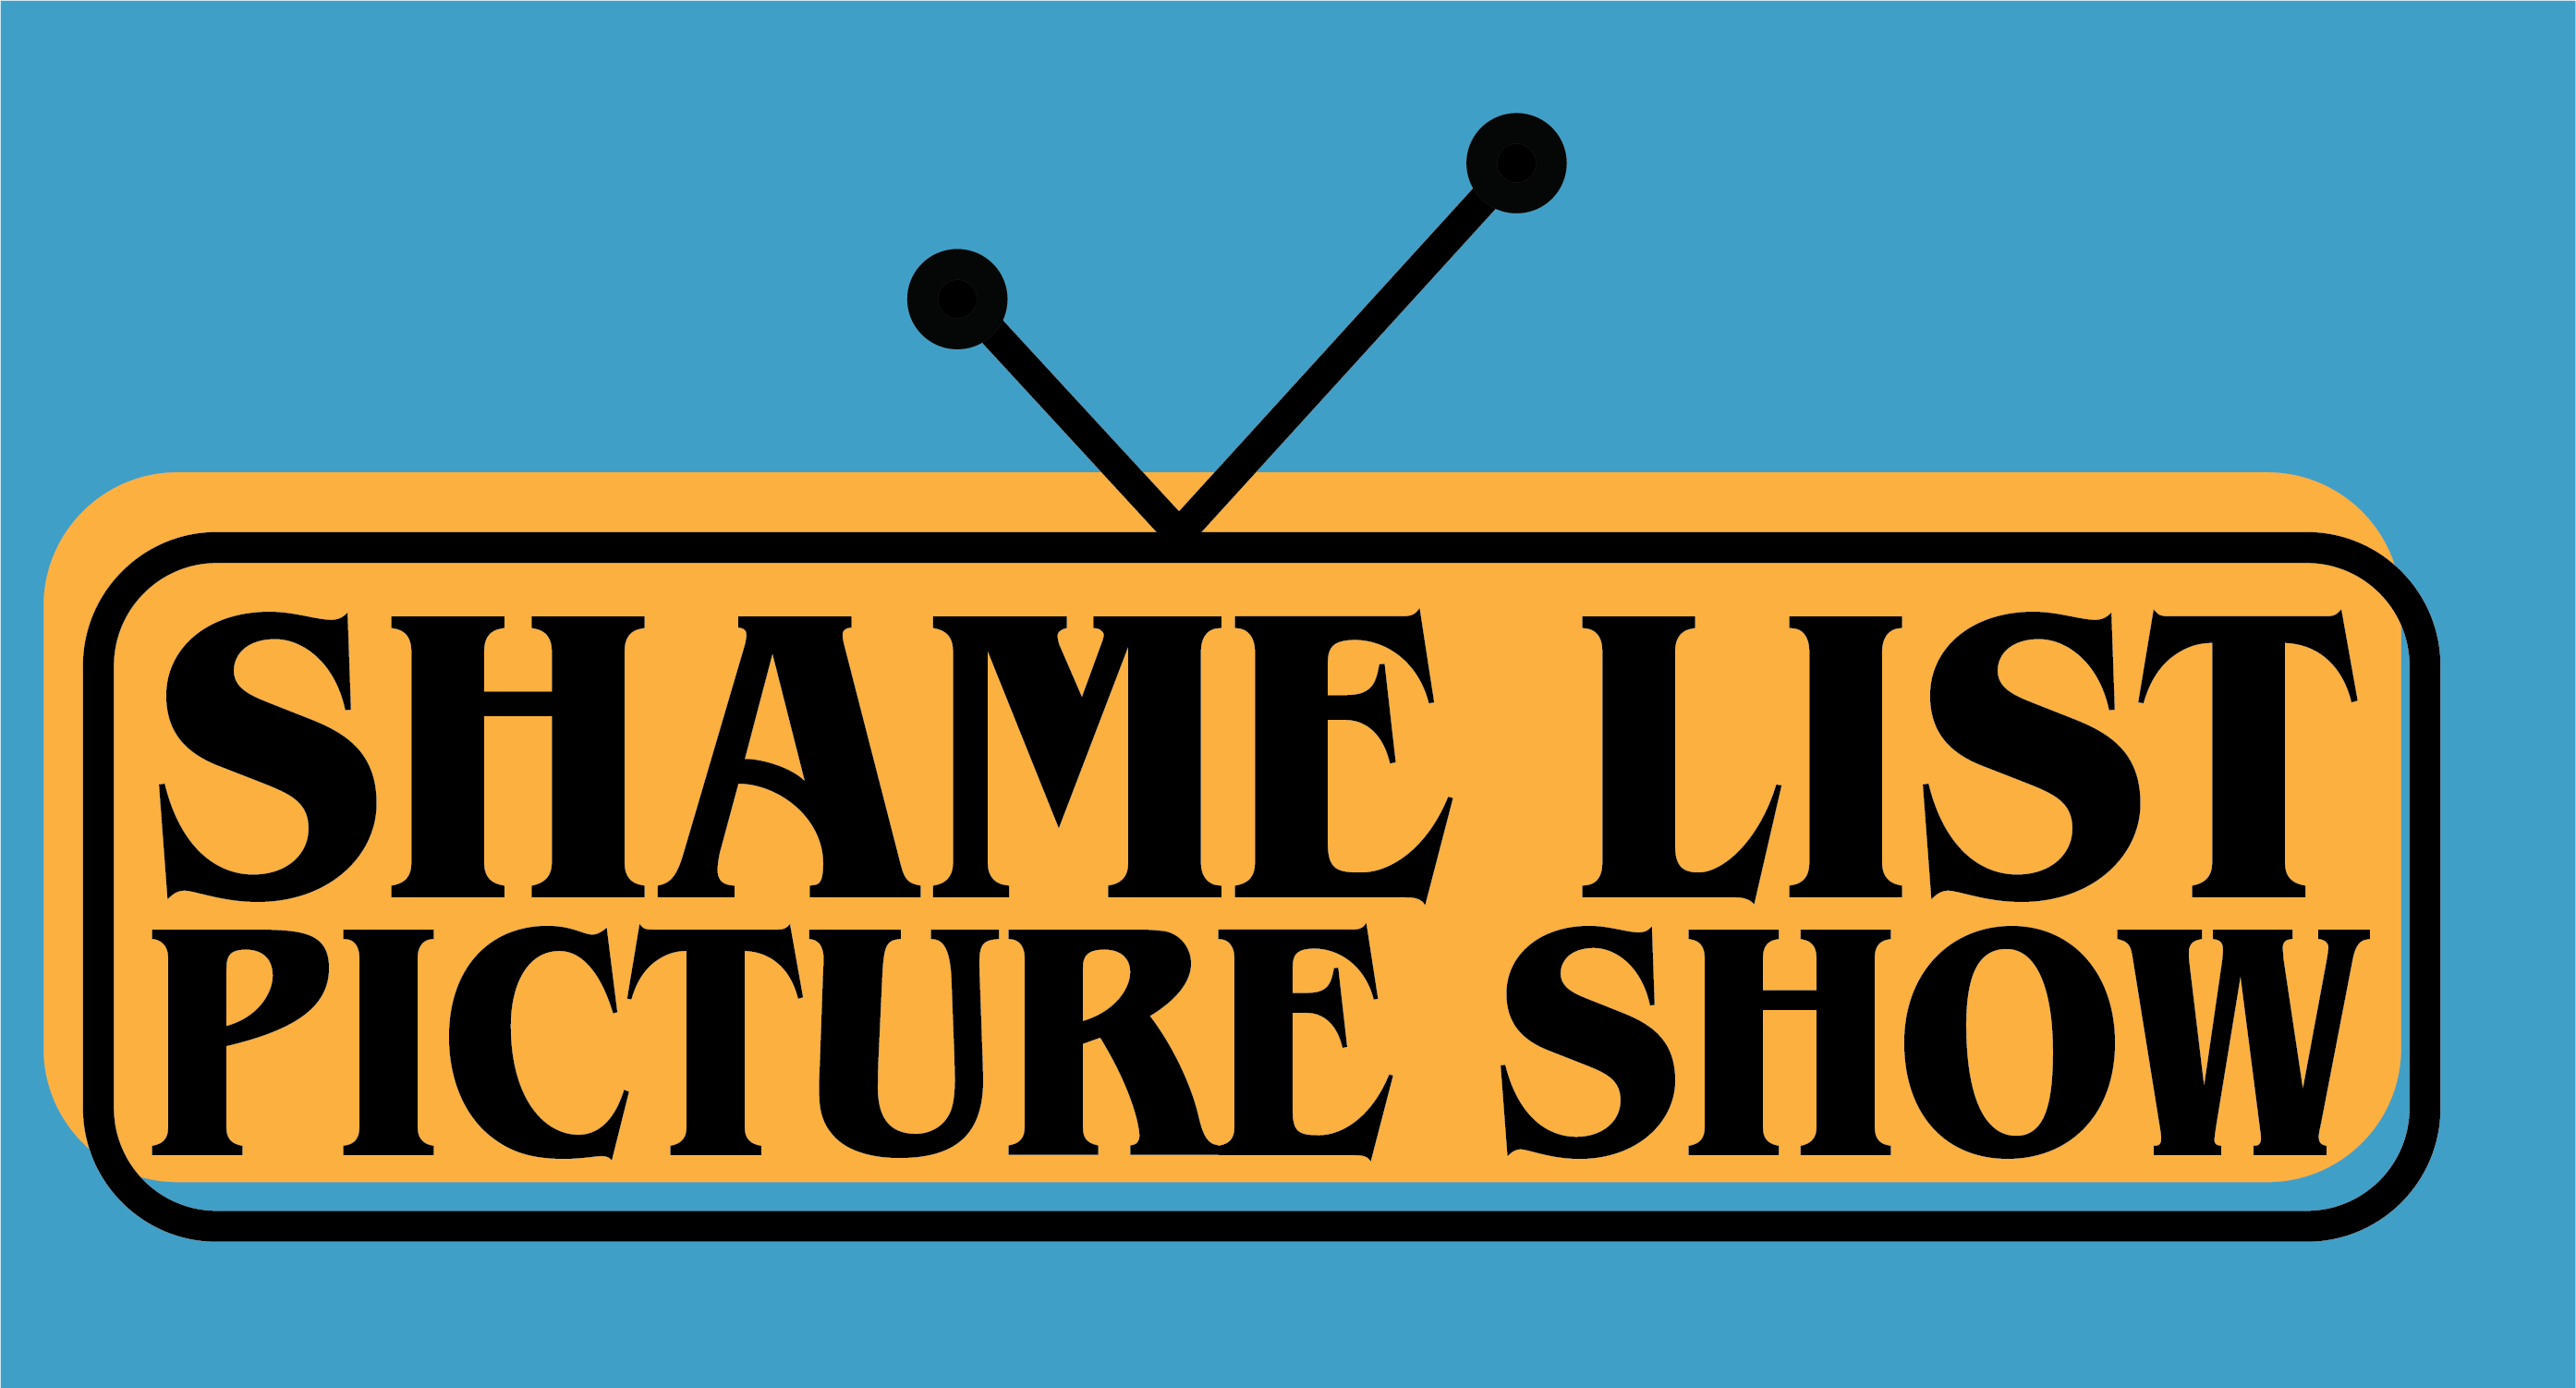 Black logo that says 'Shame List Picture Show' with the shape of a TV around it. A light blue background with a yellow rectangle behind the text.